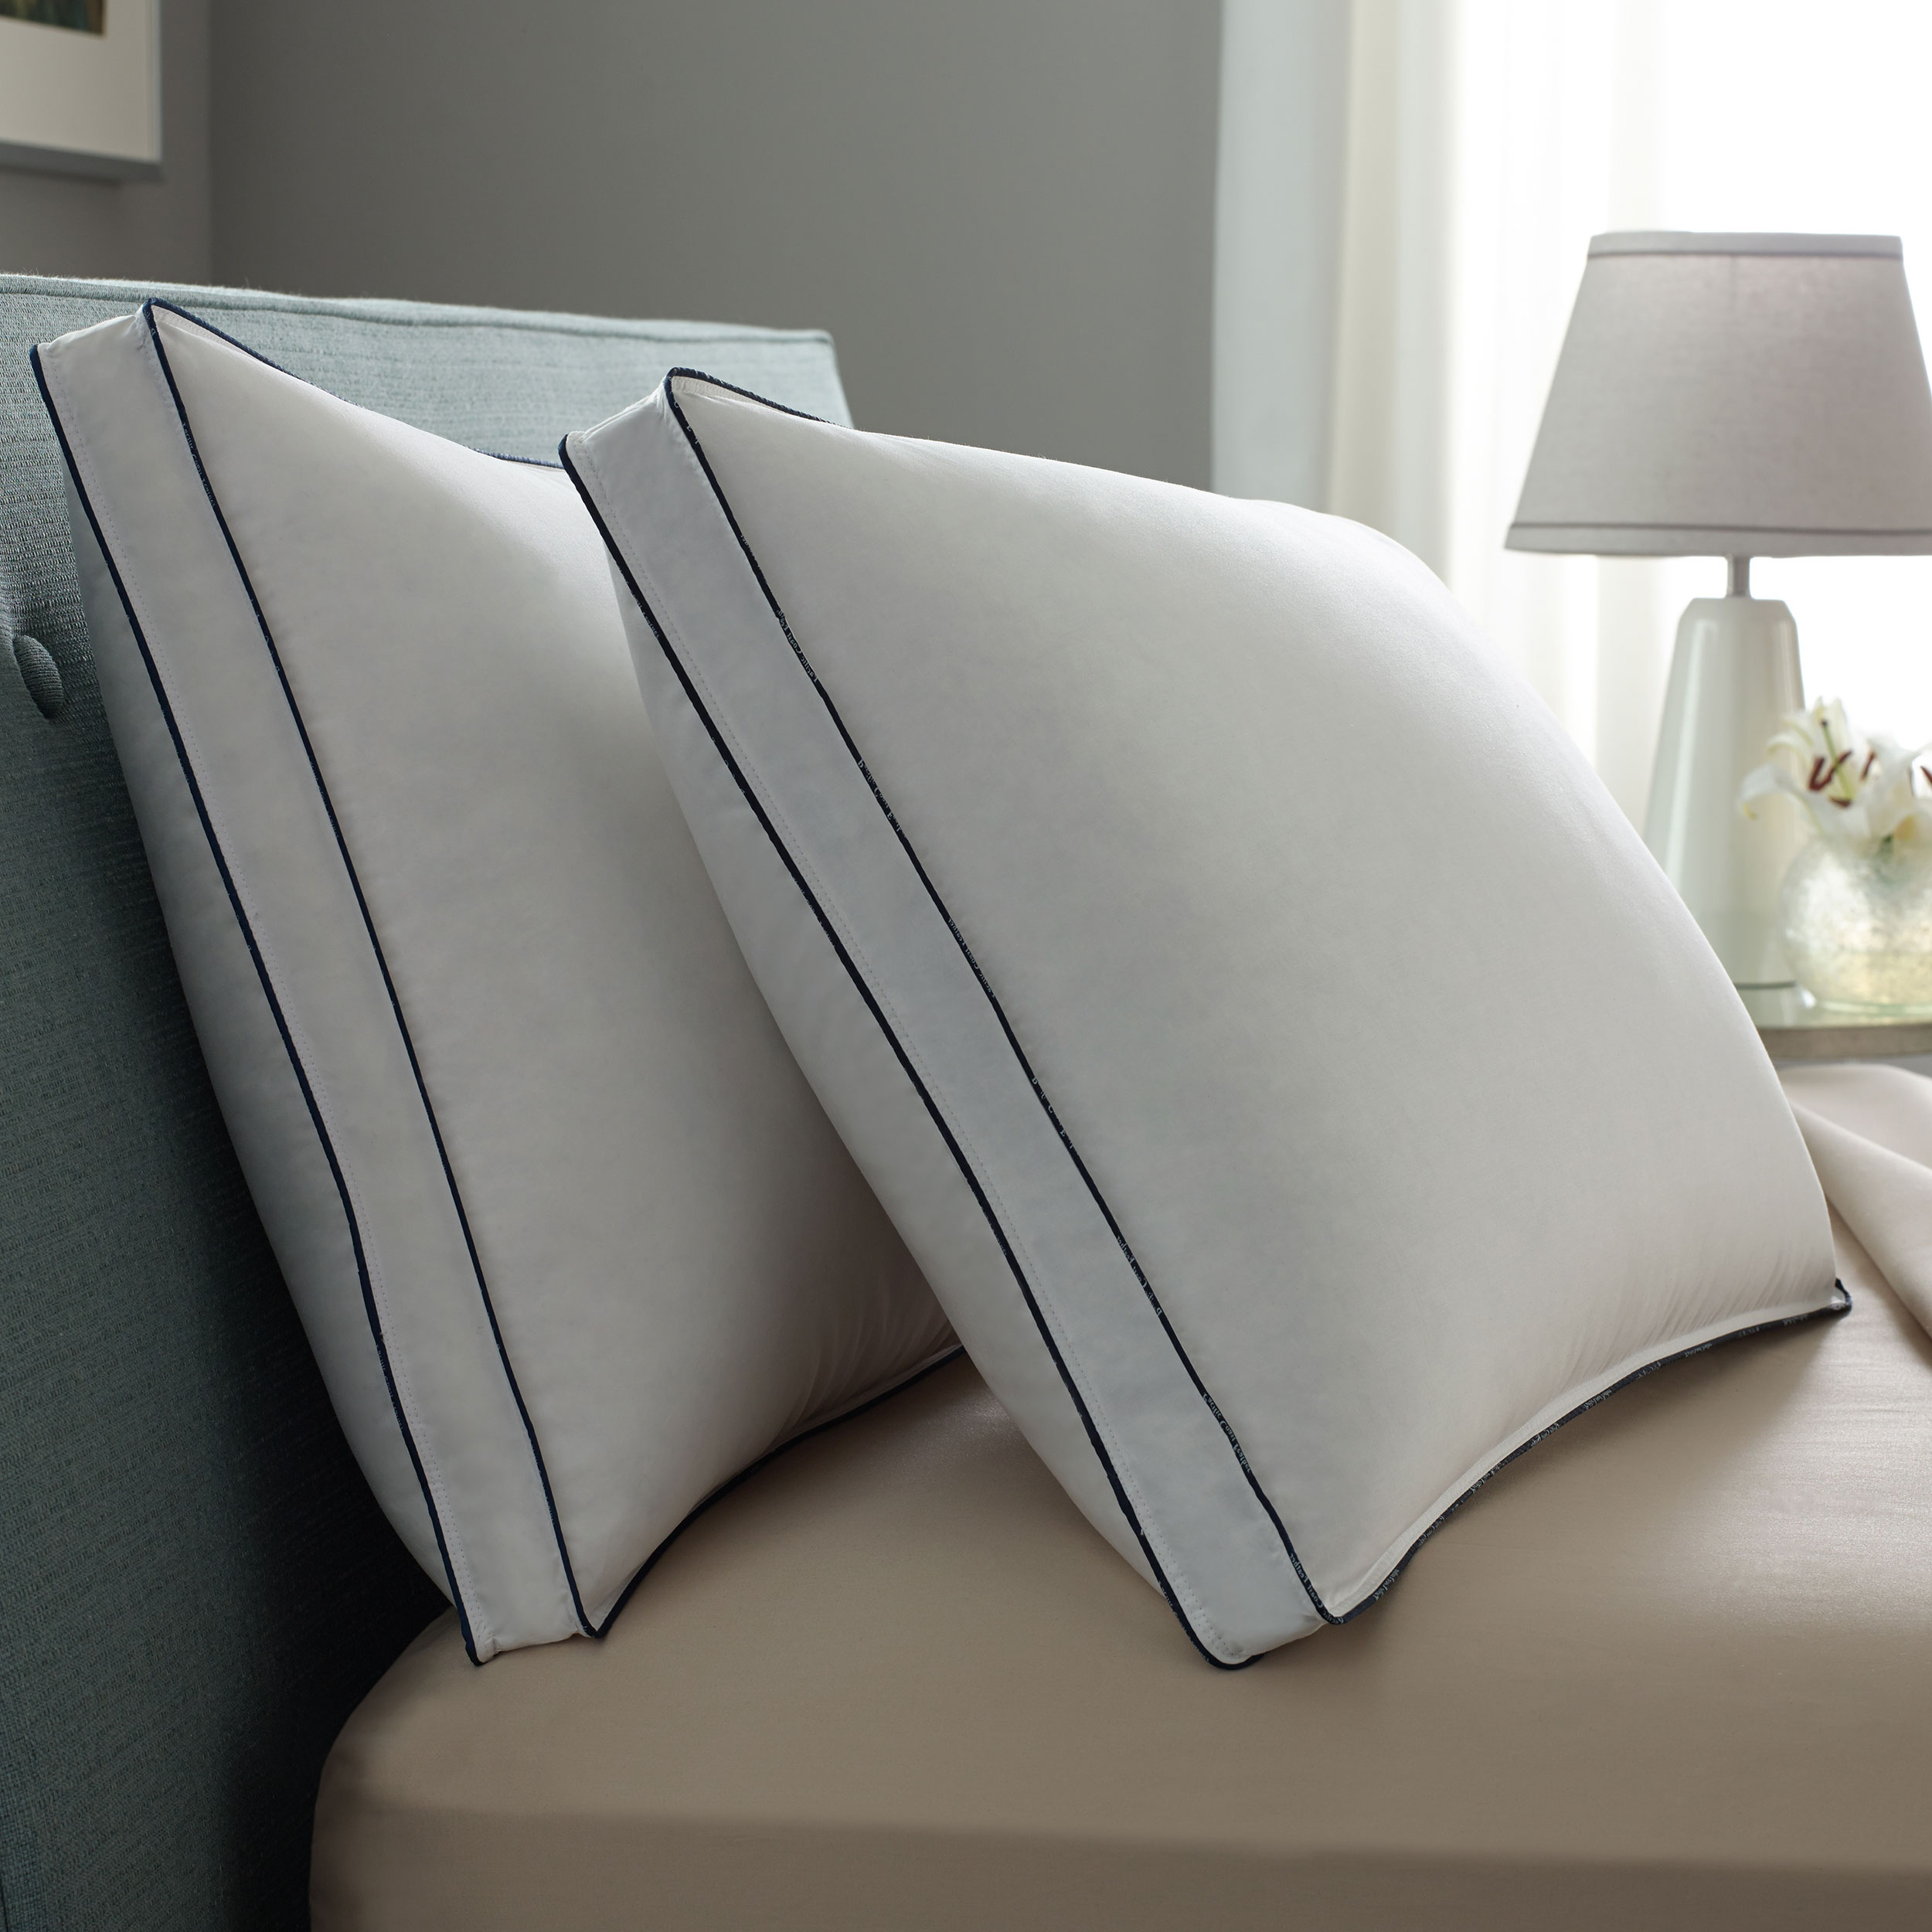 Image of Queen Double DownAround Medium 2 Pack Pillows | Pacific Coast Bedding